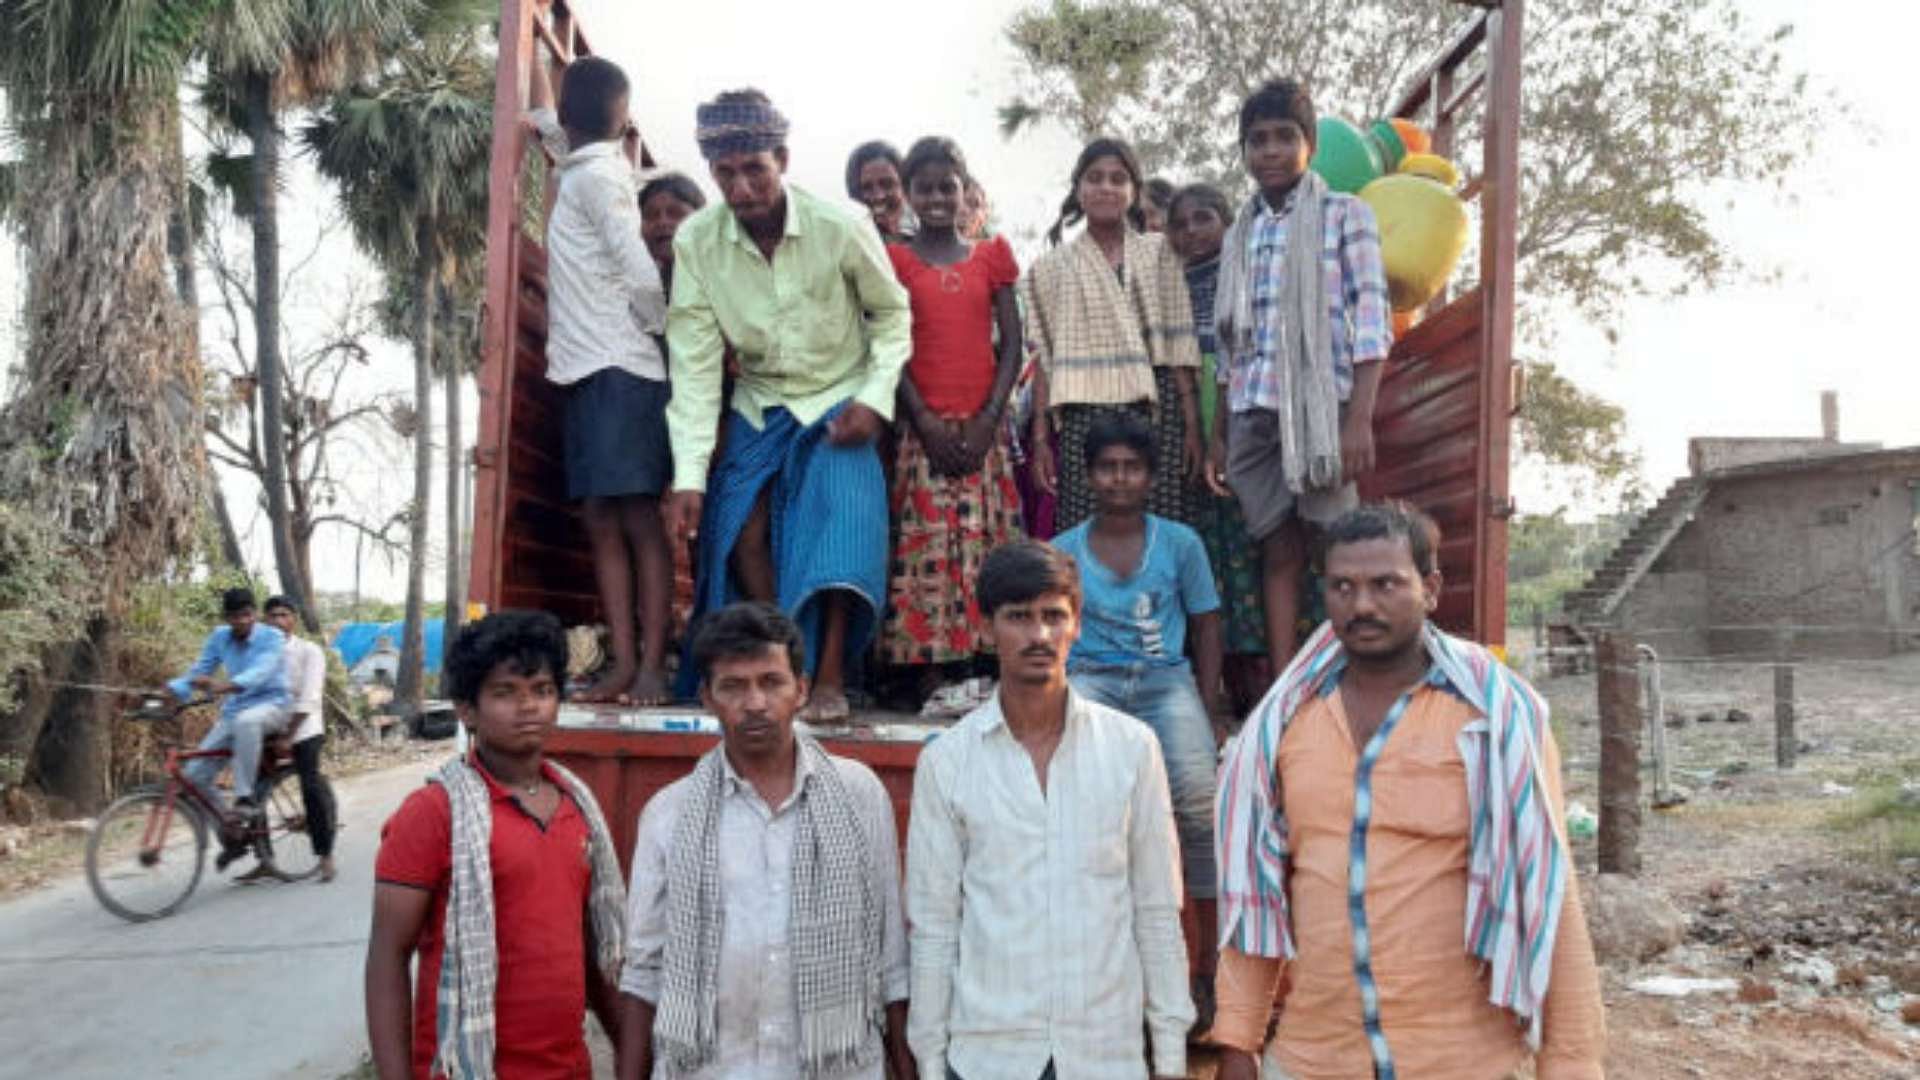 Guntur’s seasonal labourers on their way  home were made to turn back by the police at the district border due to the COVID-19 lockdown. &nbsp;